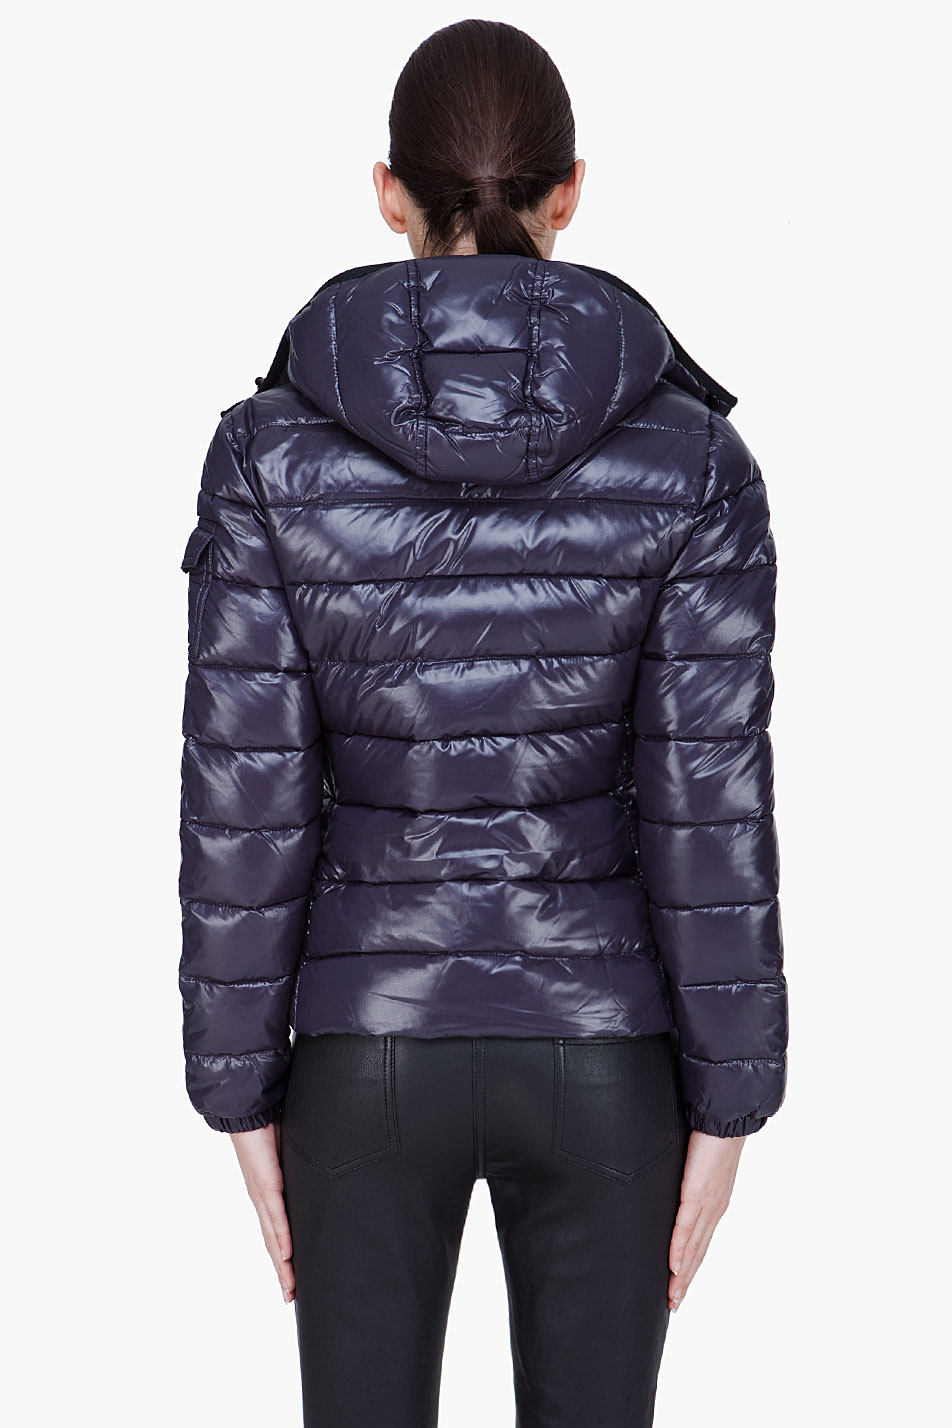 Lyst - Moncler Quilted Navy Bady Jacket in Blue